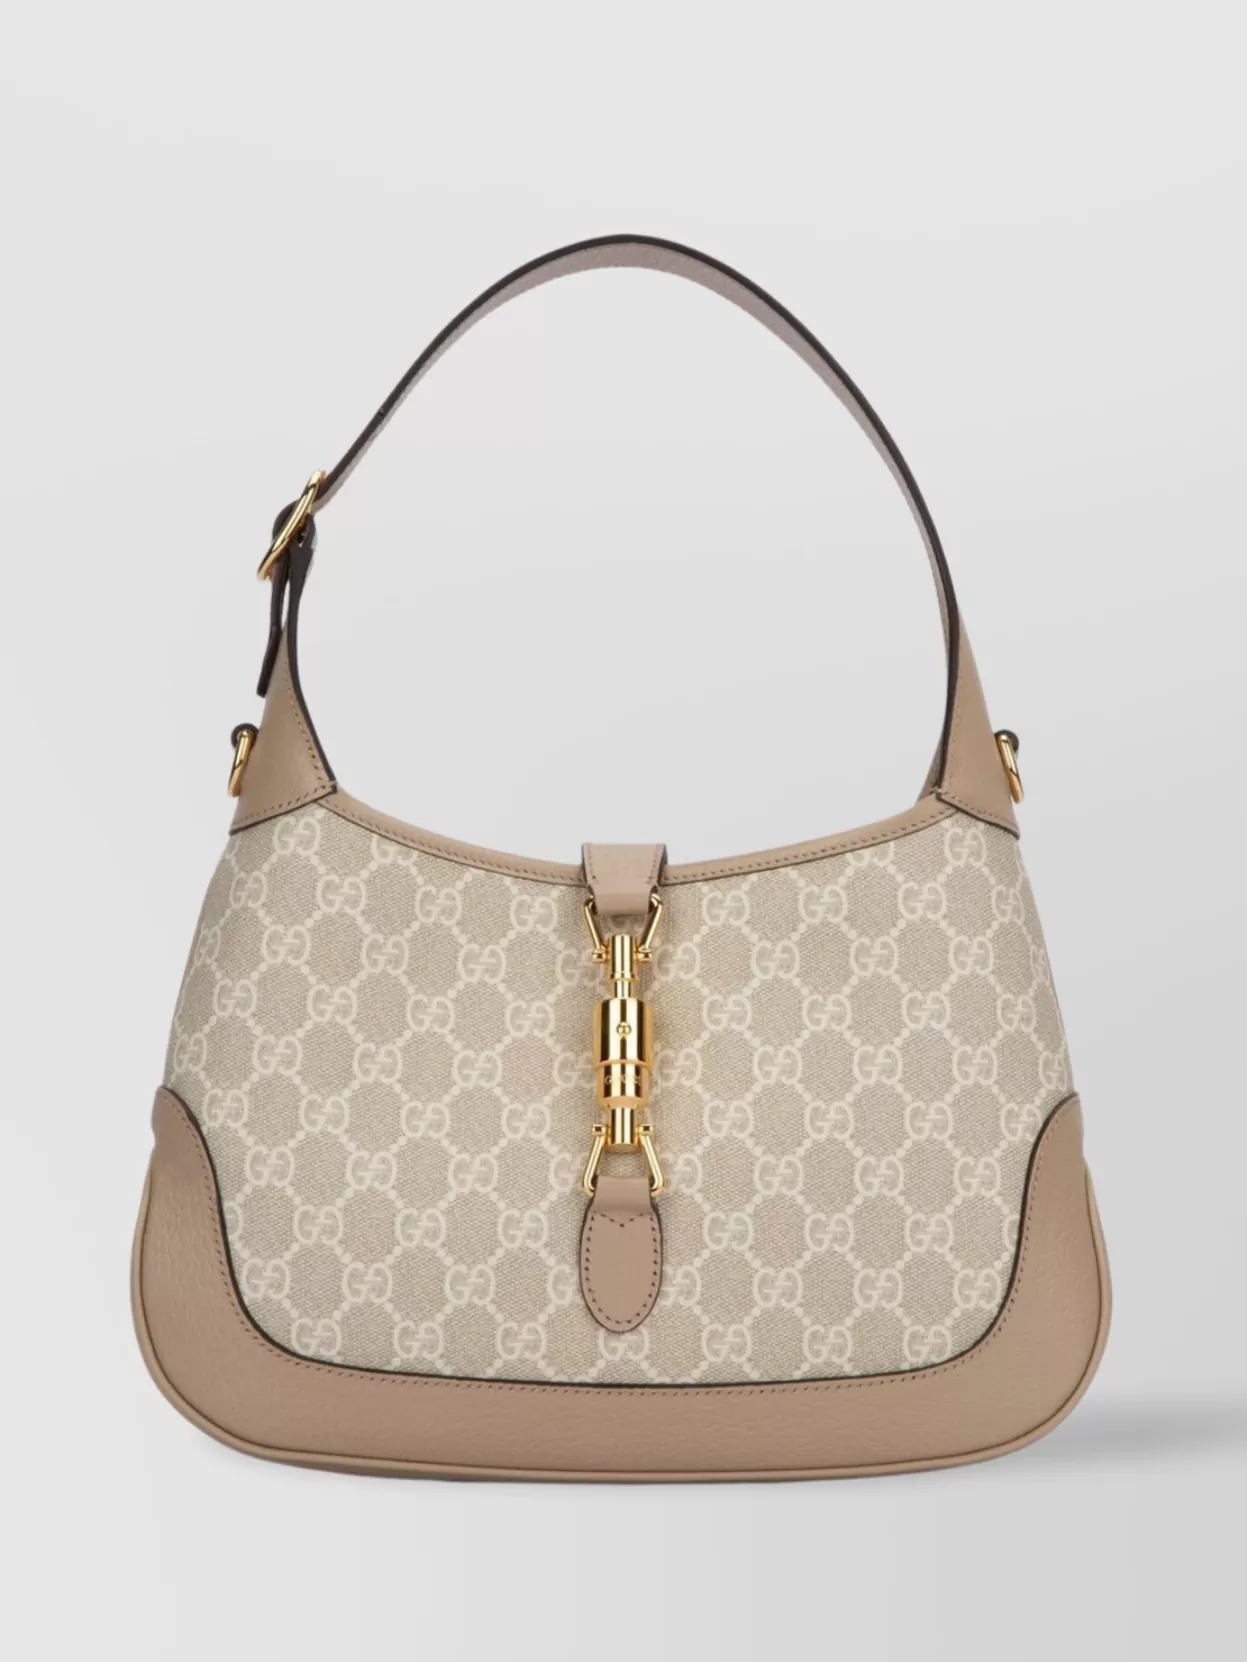 Gucci Monogram Chain Leather Shoulder Bag In Brown